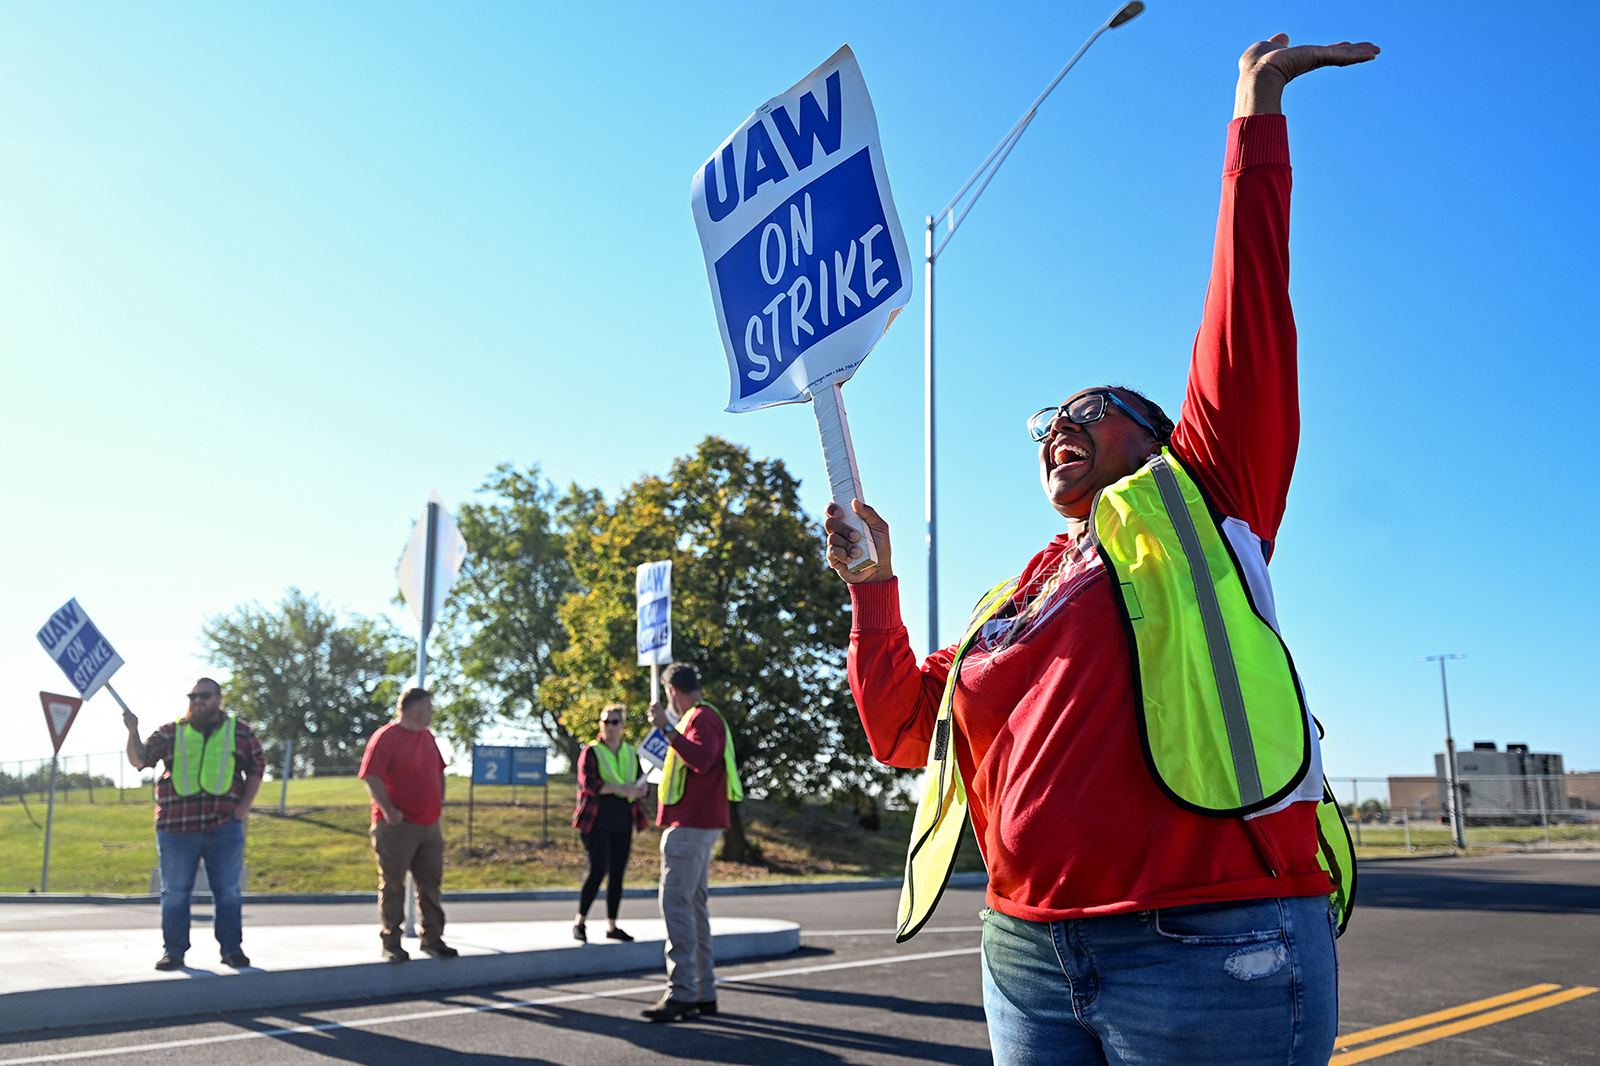 GM workers with the UAW Local 2250 Union strike outside the General Motors Wentzville assembly plant today in Wentzville, Missouri. 